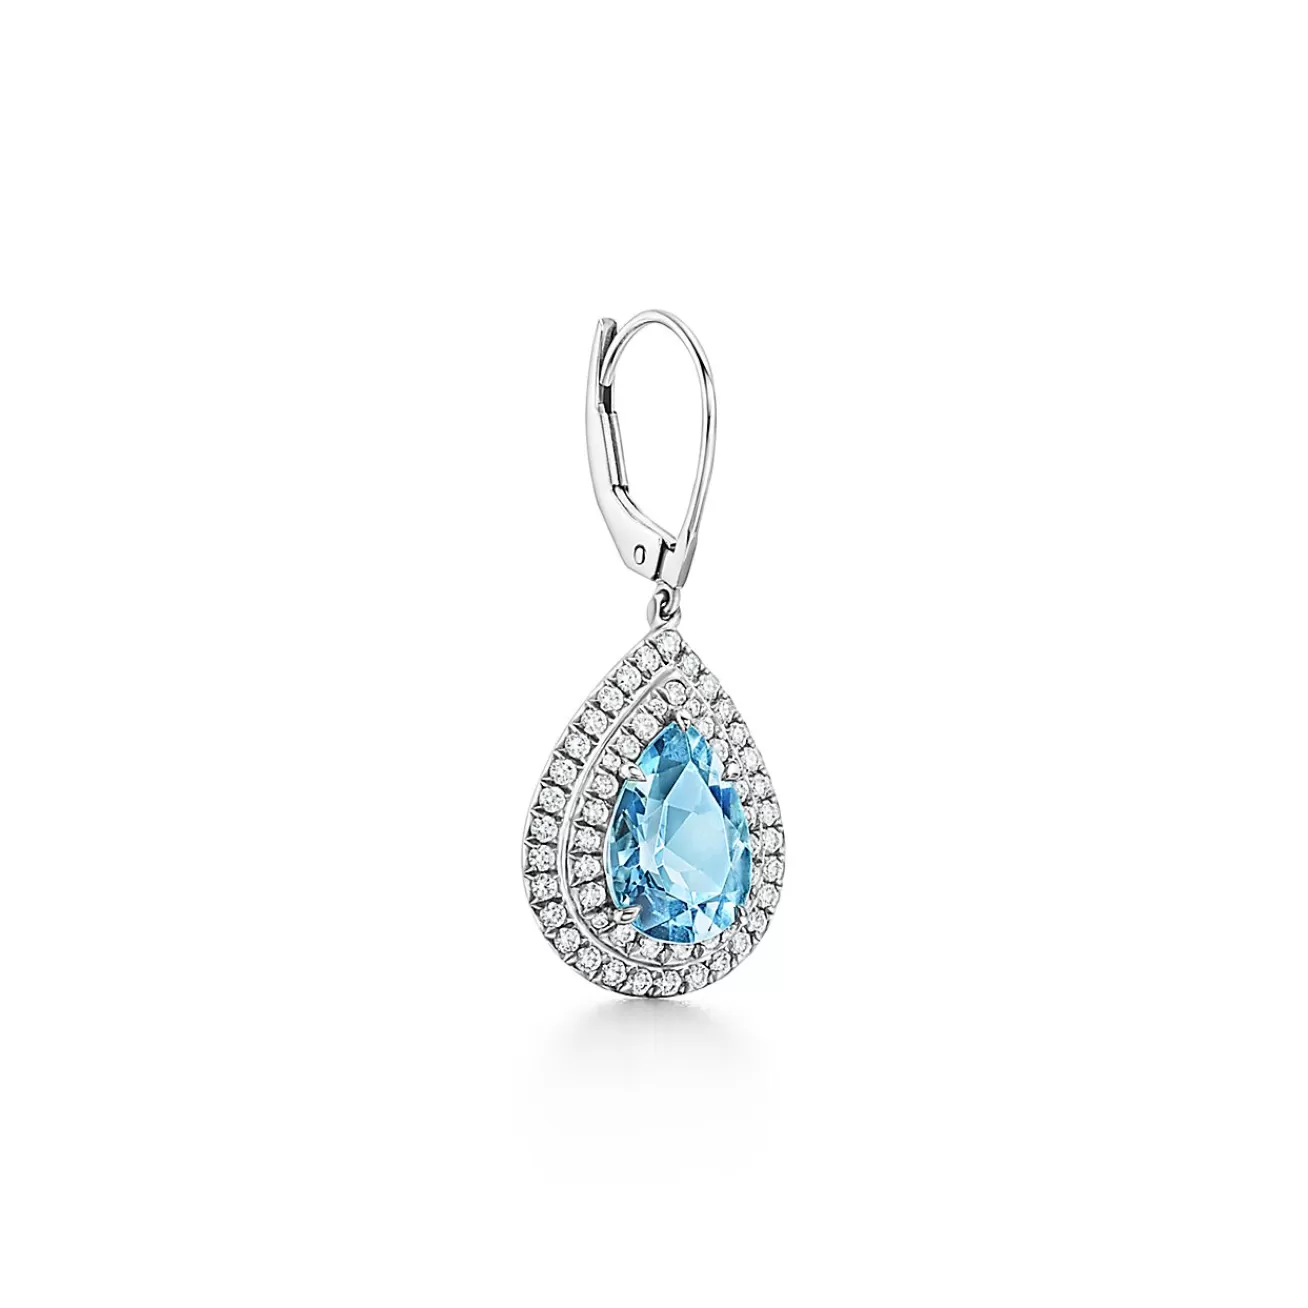 Tiffany & Co. Tiffany Soleste® earrings in platinum with diamonds and aquamarines. | ^ Earrings | Platinum Jewelry